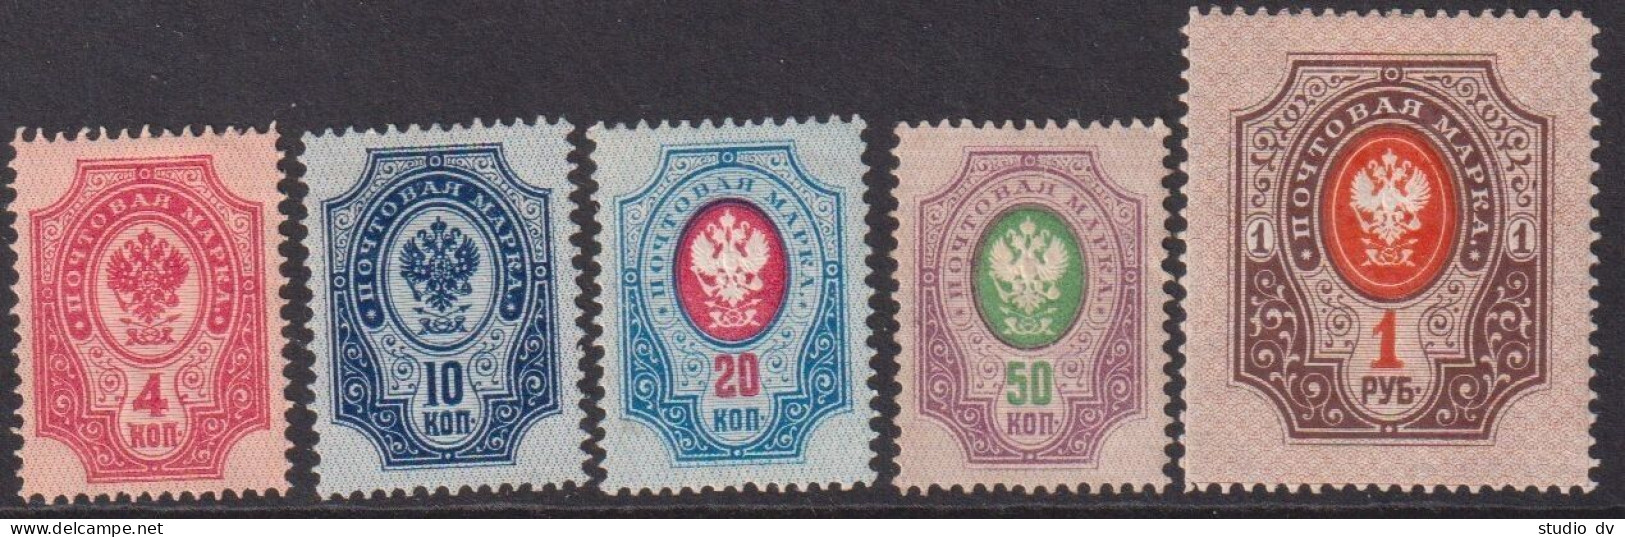 Russia 1889 10th Issue 4-50k, 1R Horizontal Watermark, Mi 40x-44x MLH - Unused Stamps